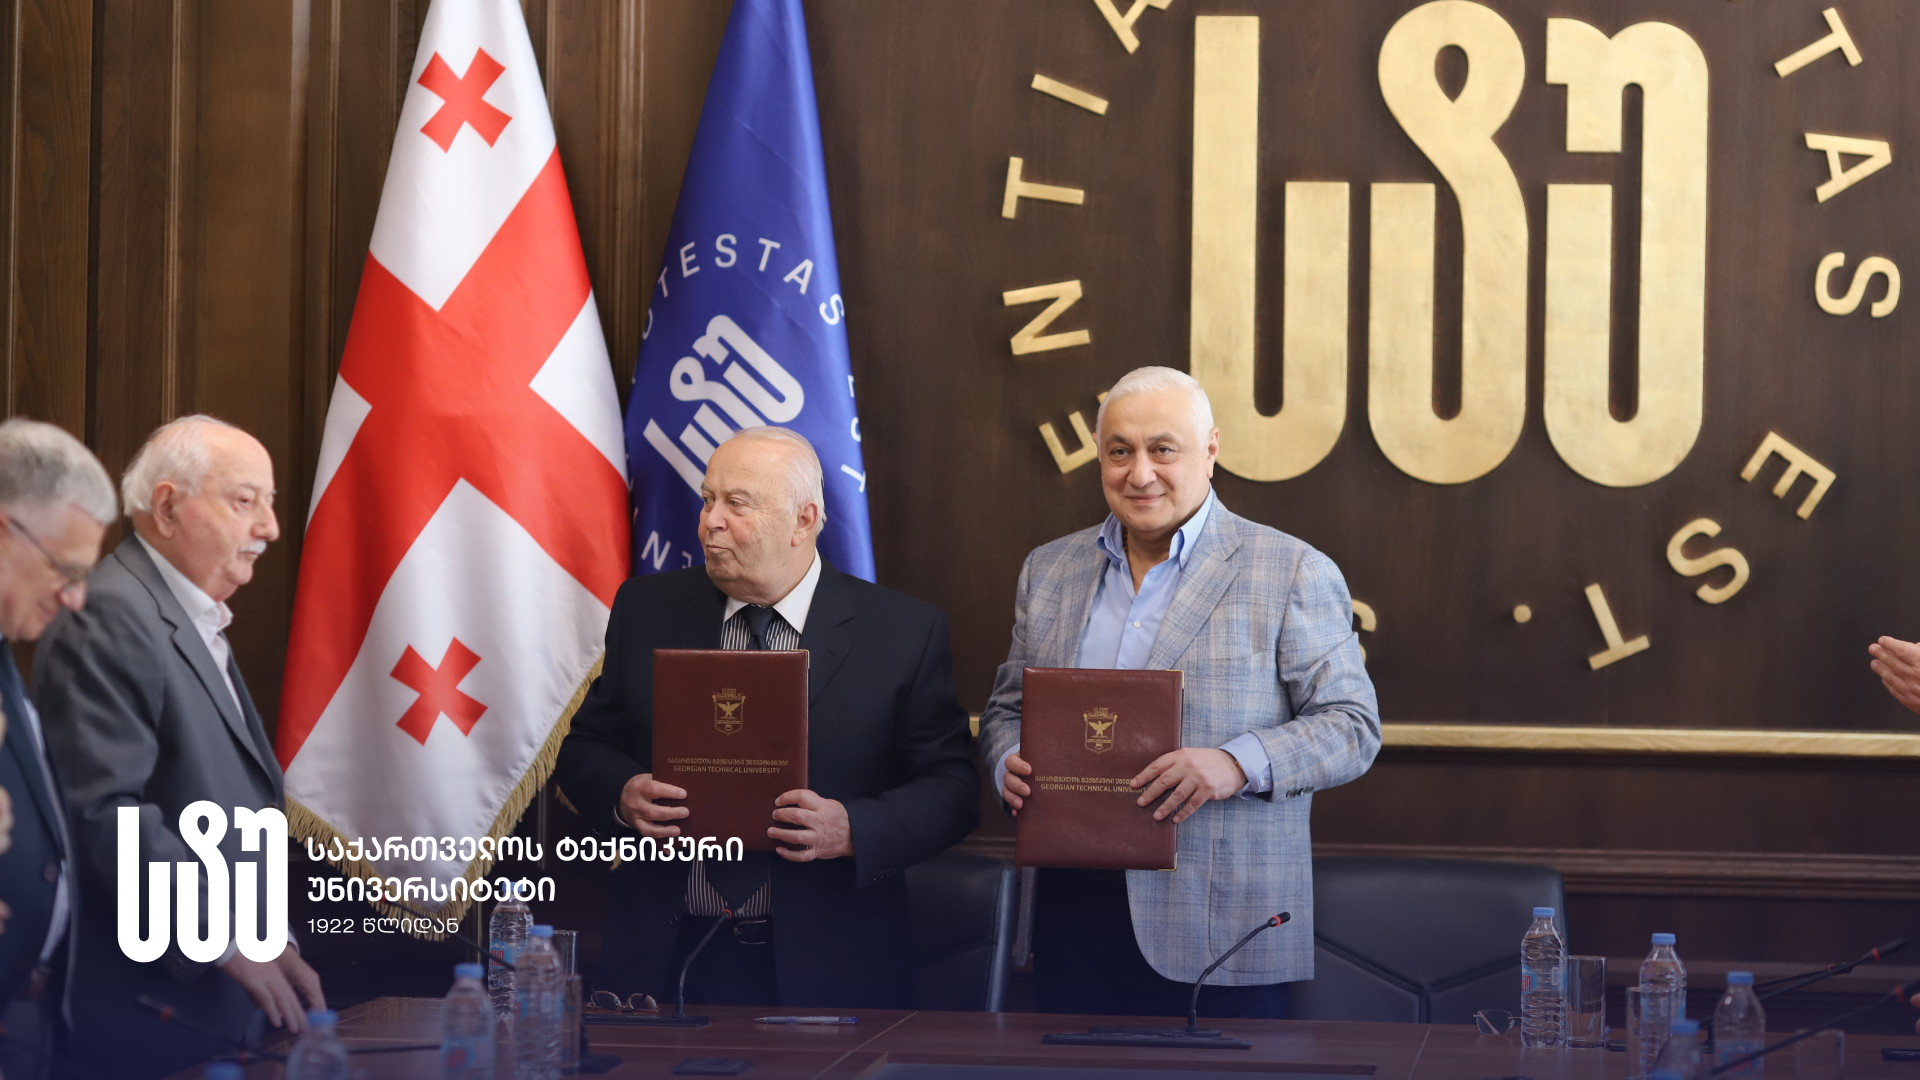 A memorandum of cooperation was signed between GTU and the Georgian Academy of Agricultural Sciences